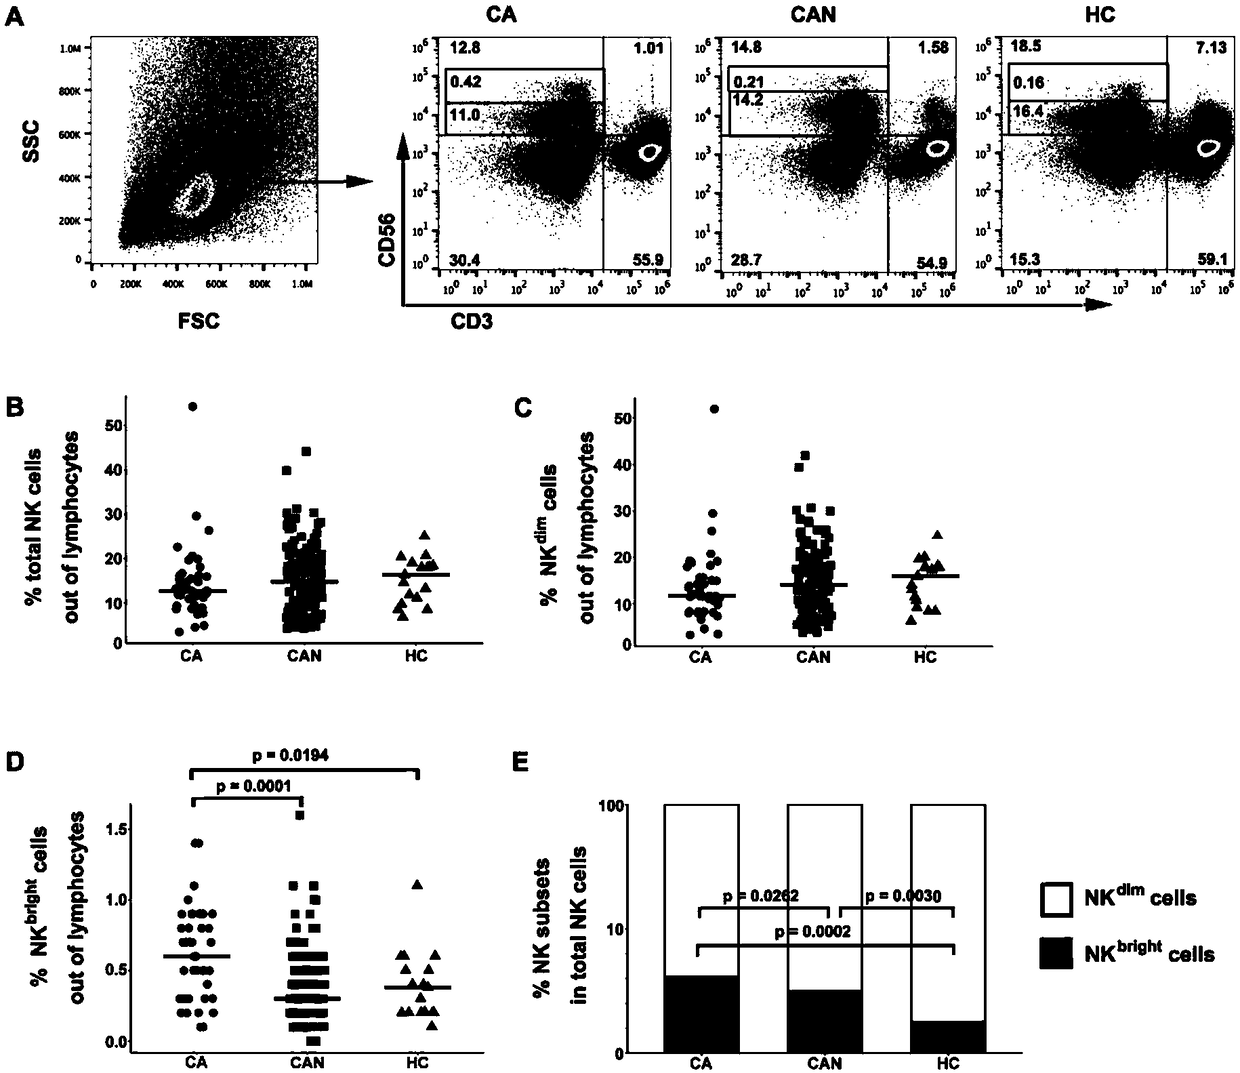 Functionality detection and evaluation method and functionality detection kit for liver disease NK (natural killer) cells